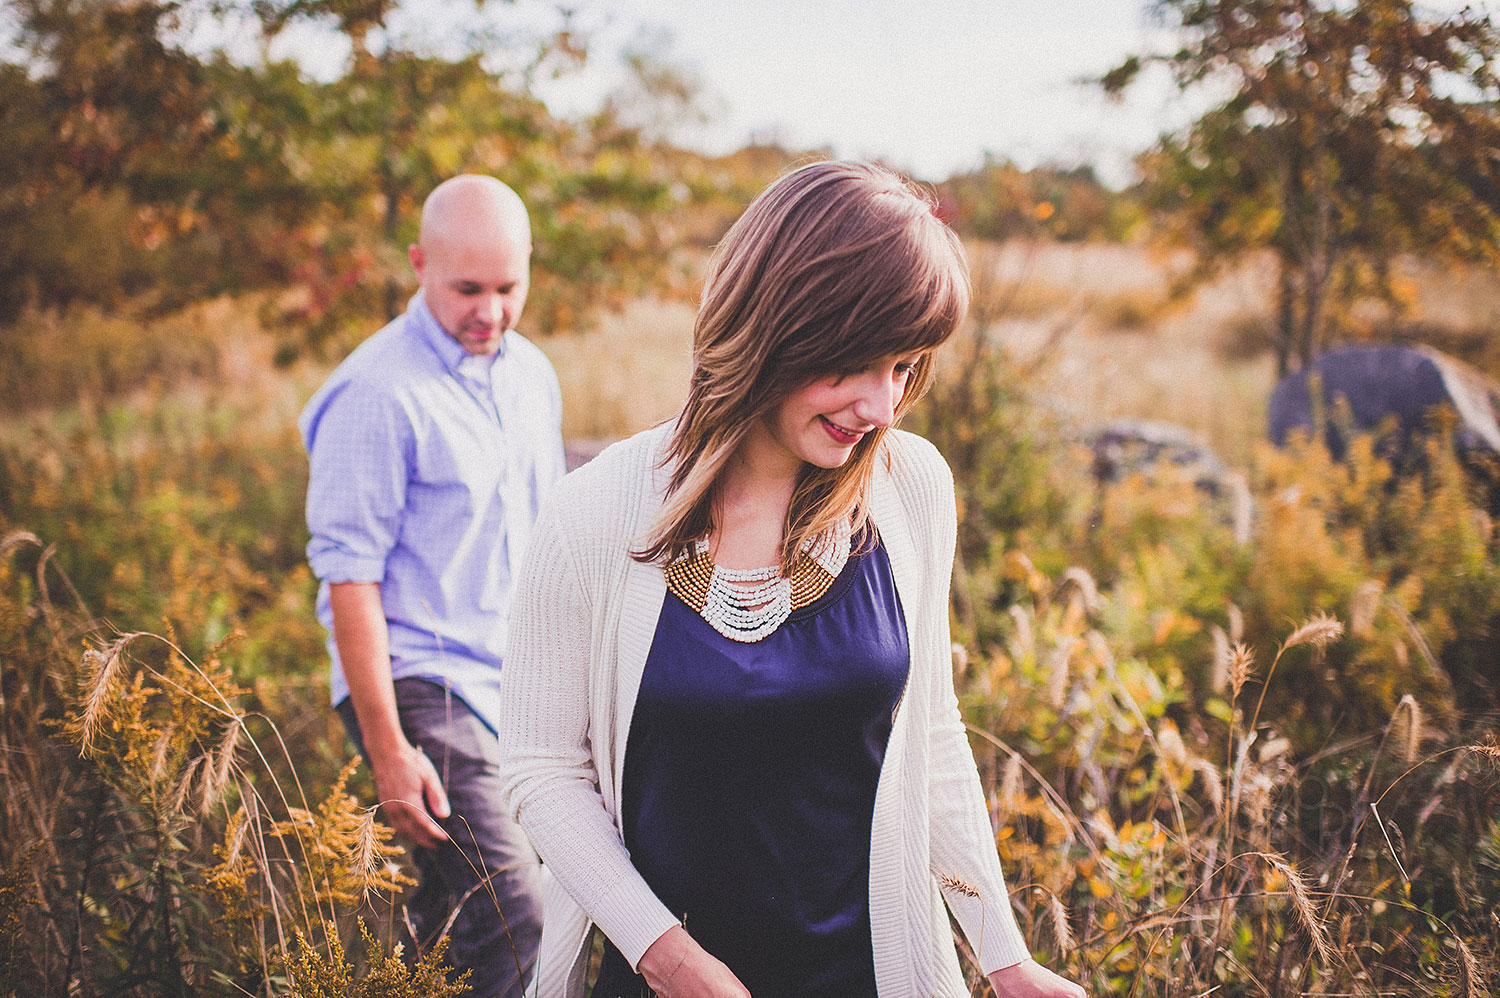 pat-robinson-photography-wilmington-engagement-session-5-2.jpg